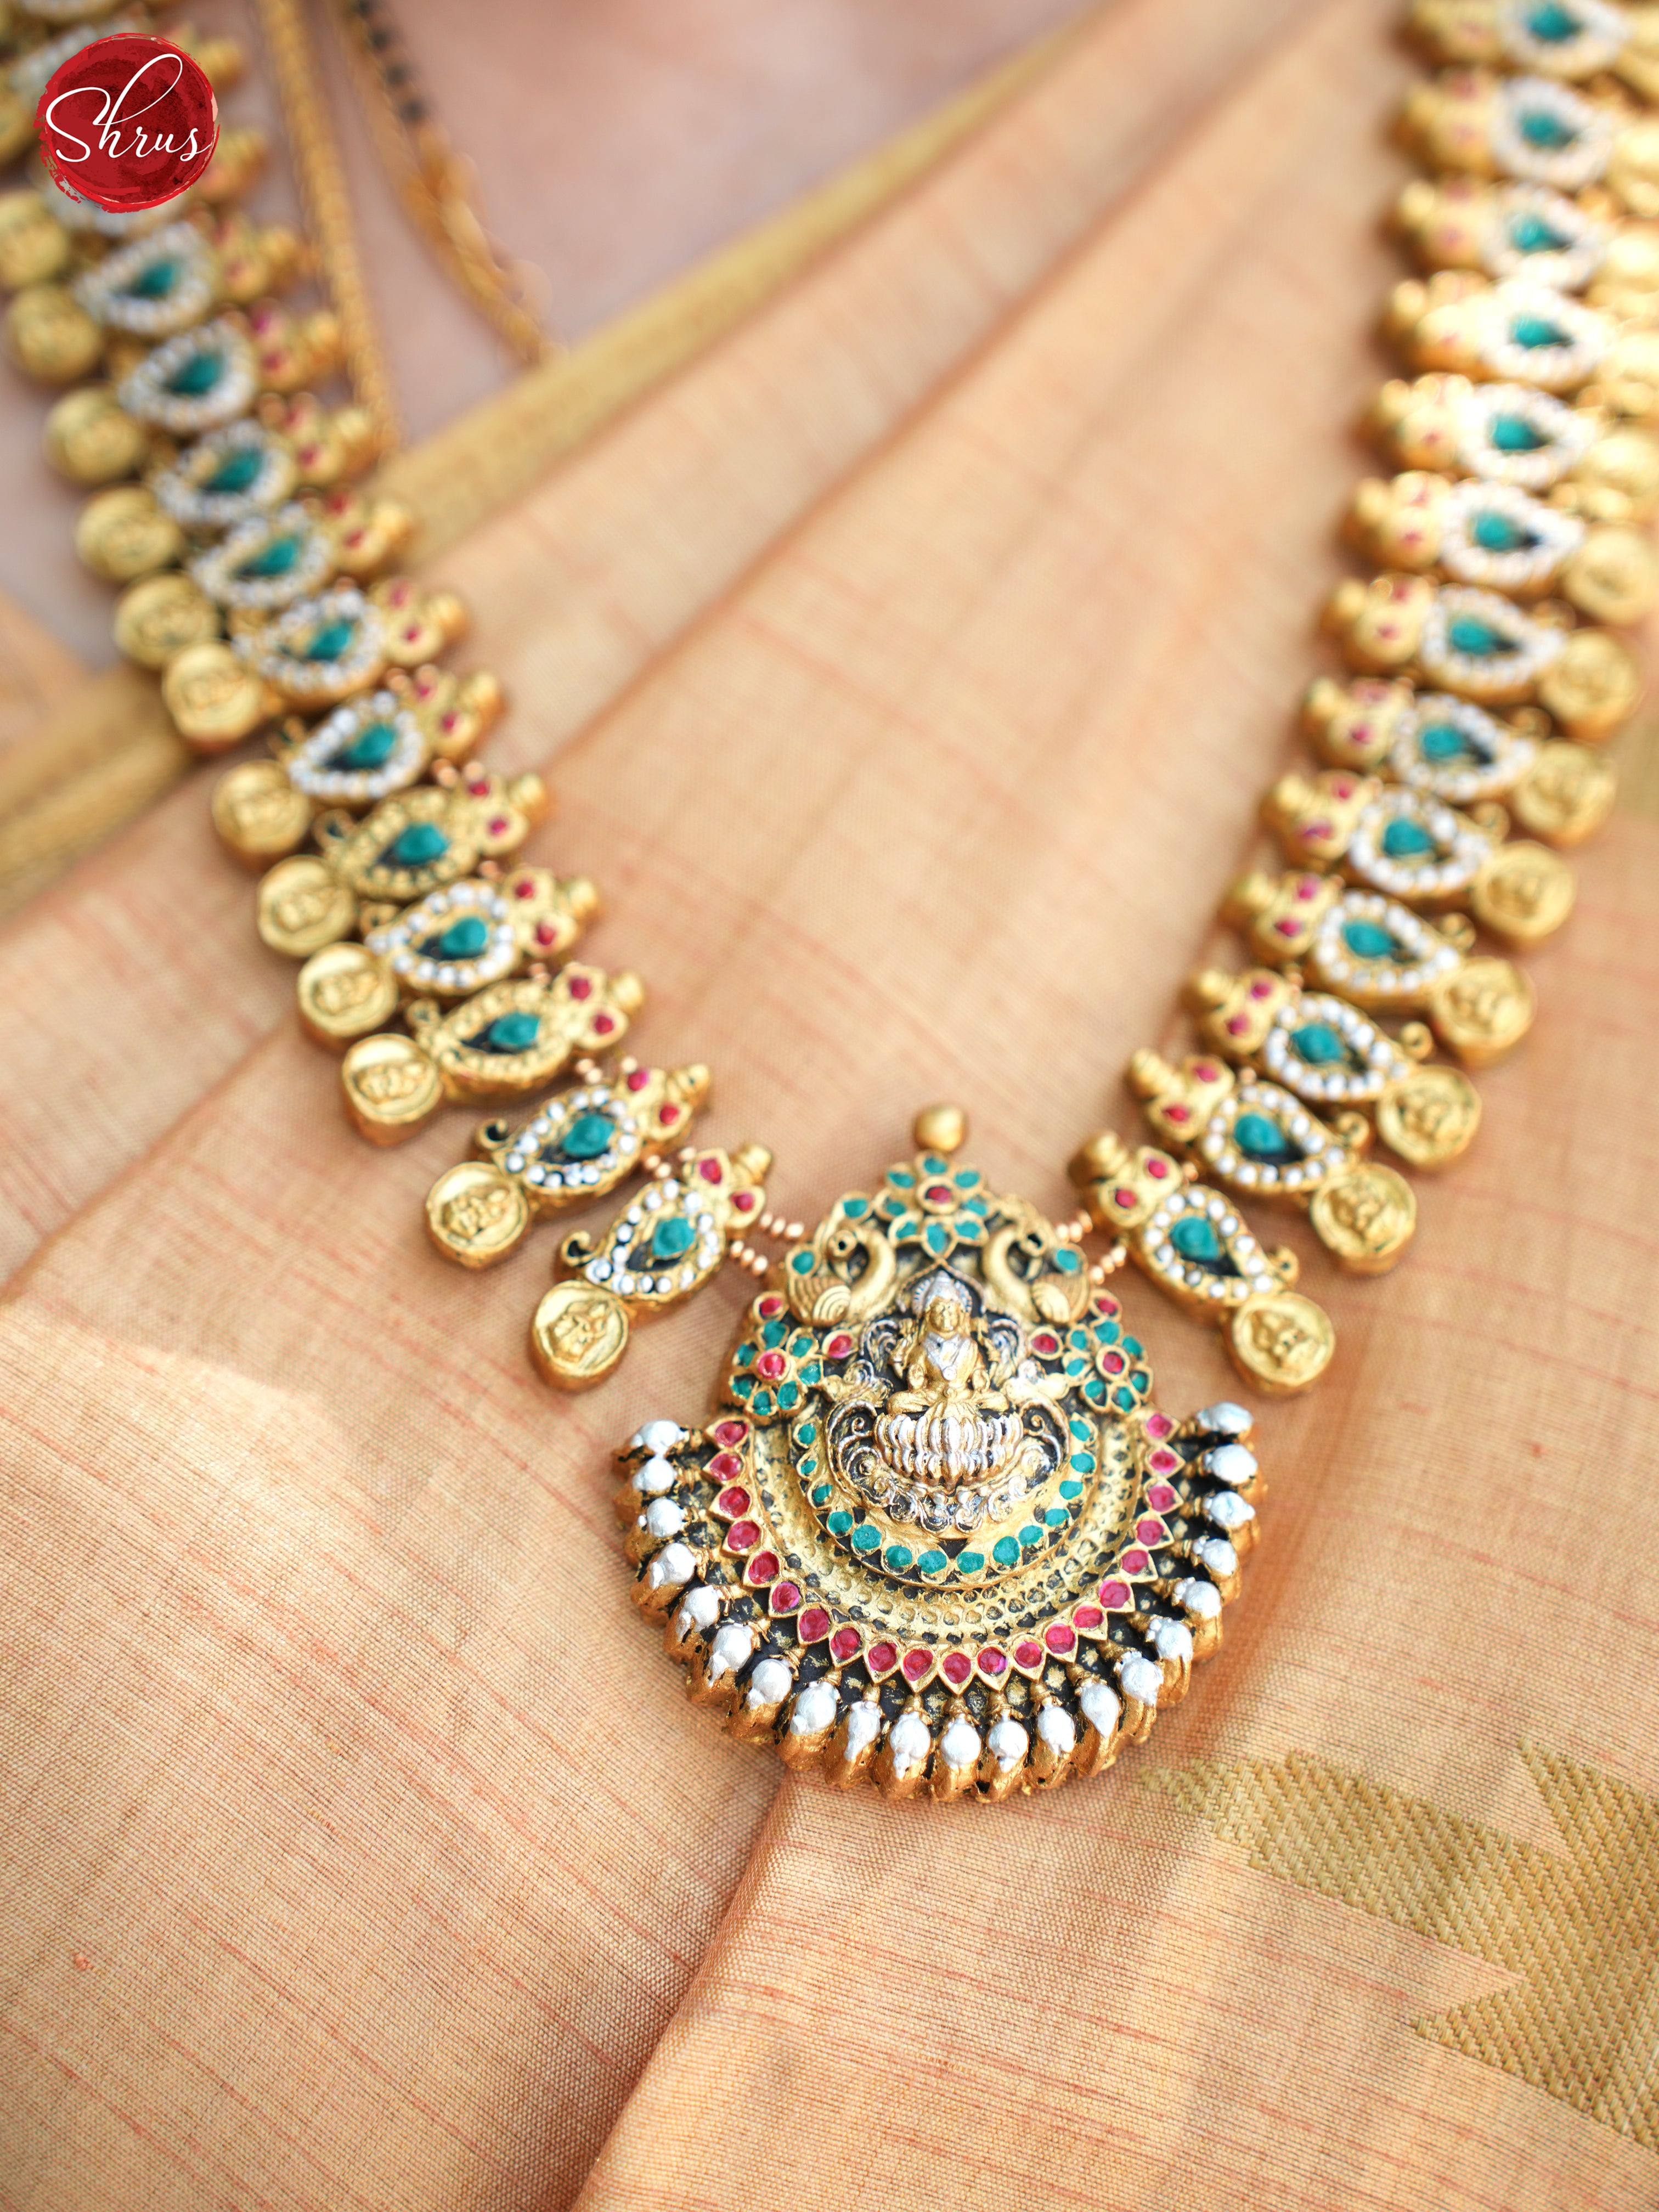 Handcrafted Lakshmi pendant  Terracotta Necklace with Jhumkas- Accessories - Shop on ShrusEternity.com